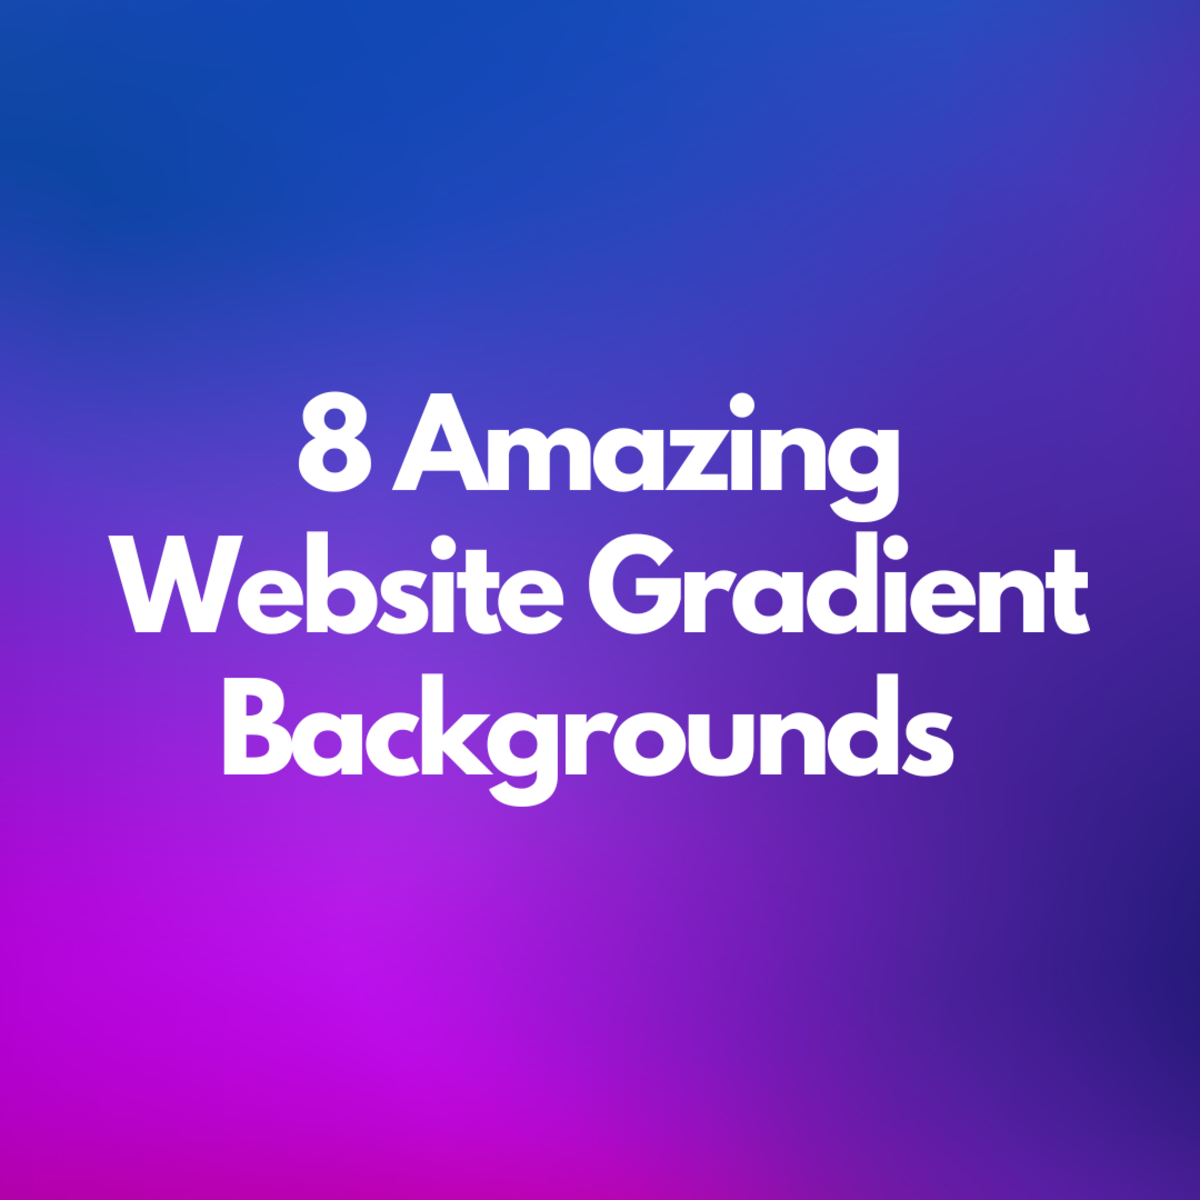 8 Amazing Website Gradient Backgrounds to Check Out: The Ultimate List